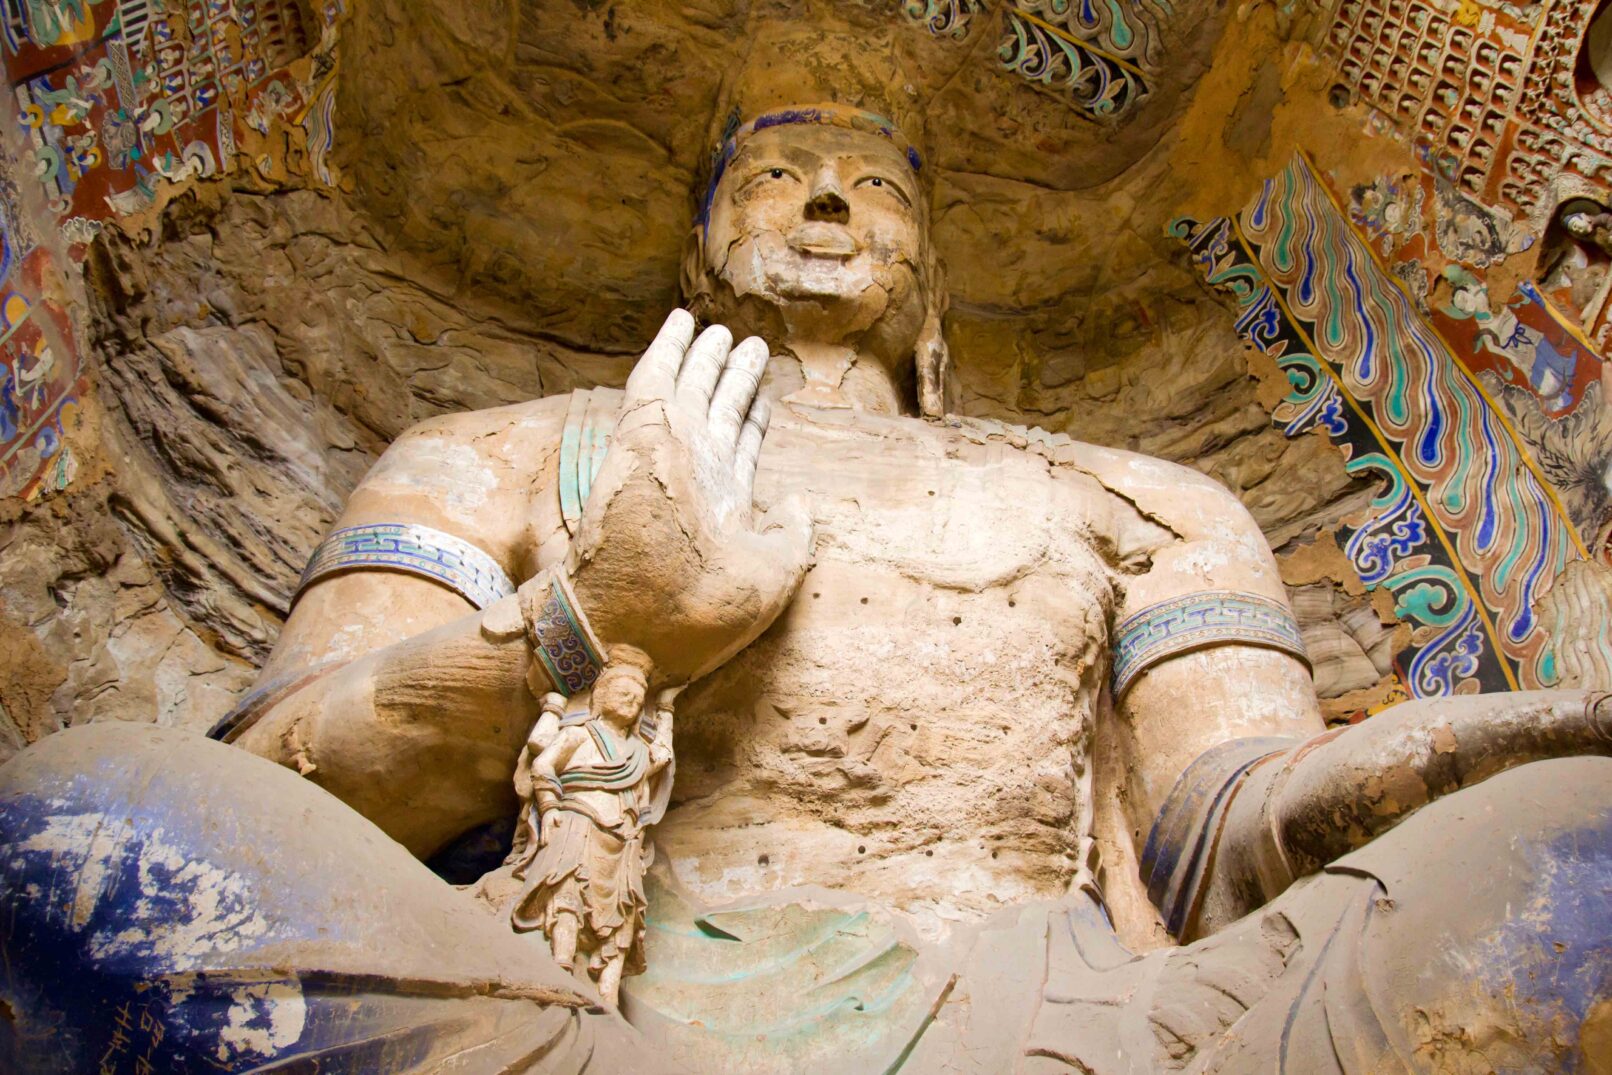 Statues in the Yungang caves in Datong on September 9, 2011. These ancient Buddhist temple grottoes (5th and 6th century) are composed of more than 51,000 statue